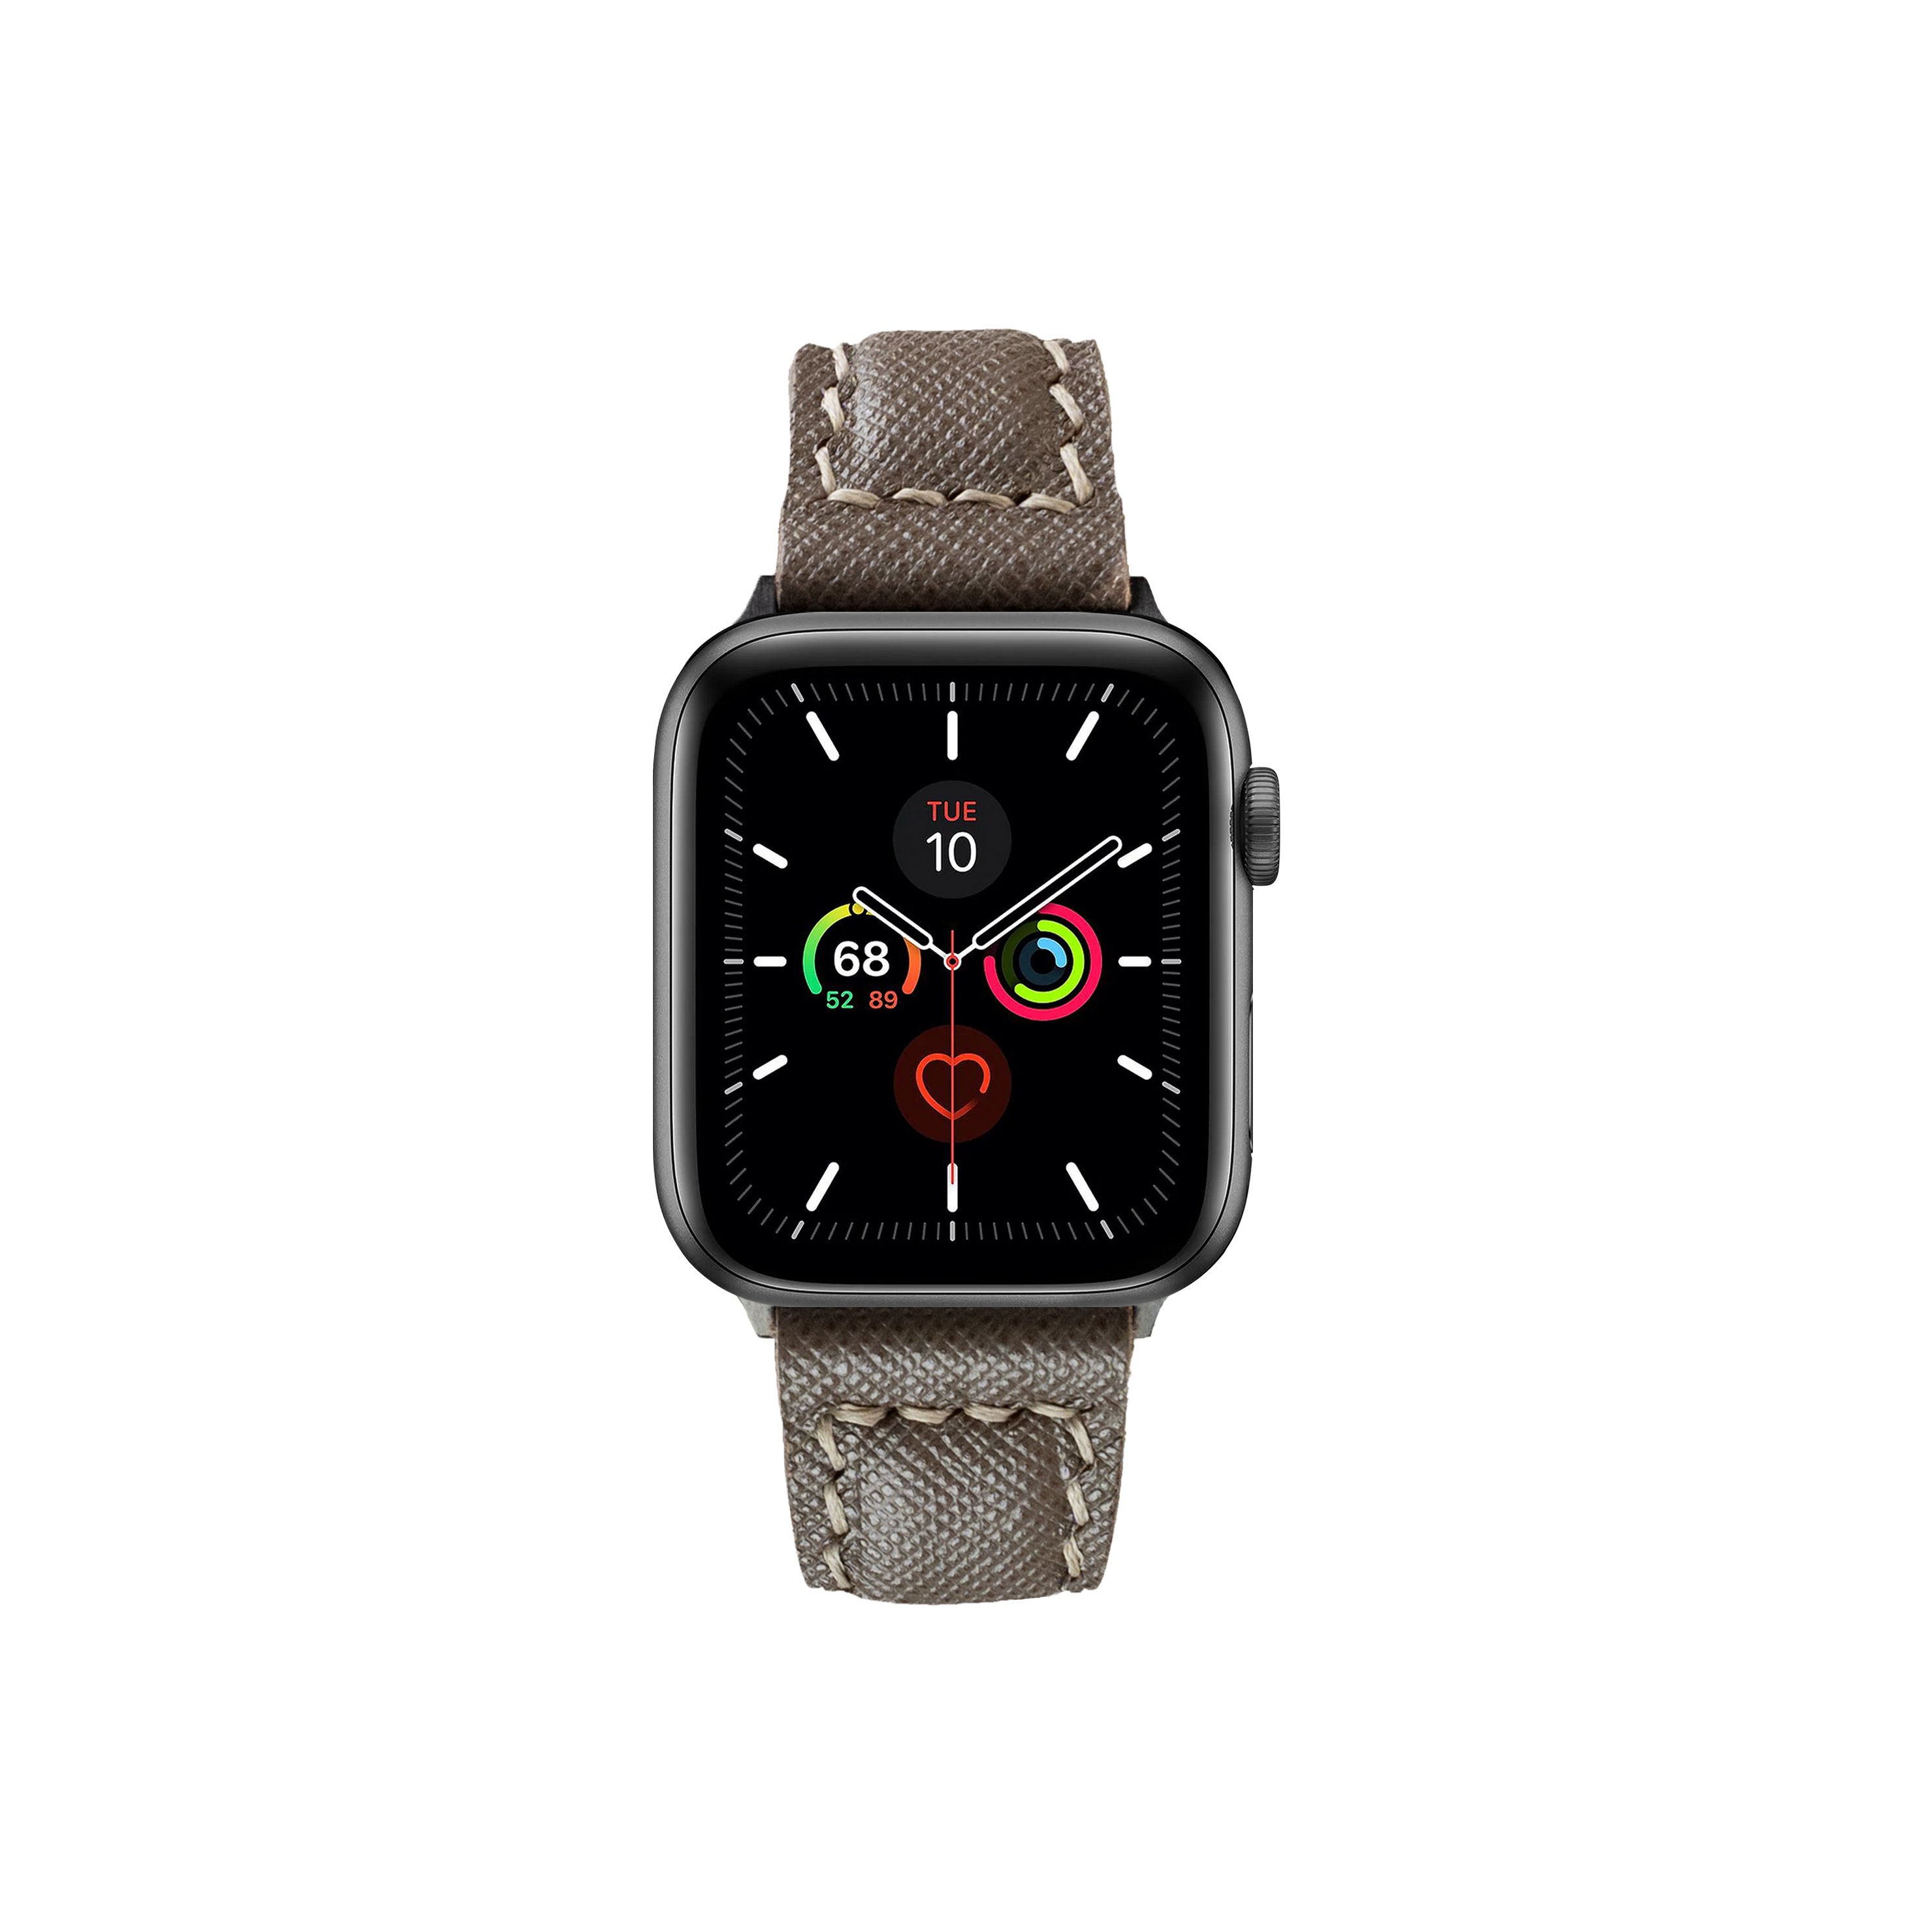 Apple Watch Double Layer Leather Band - Latte